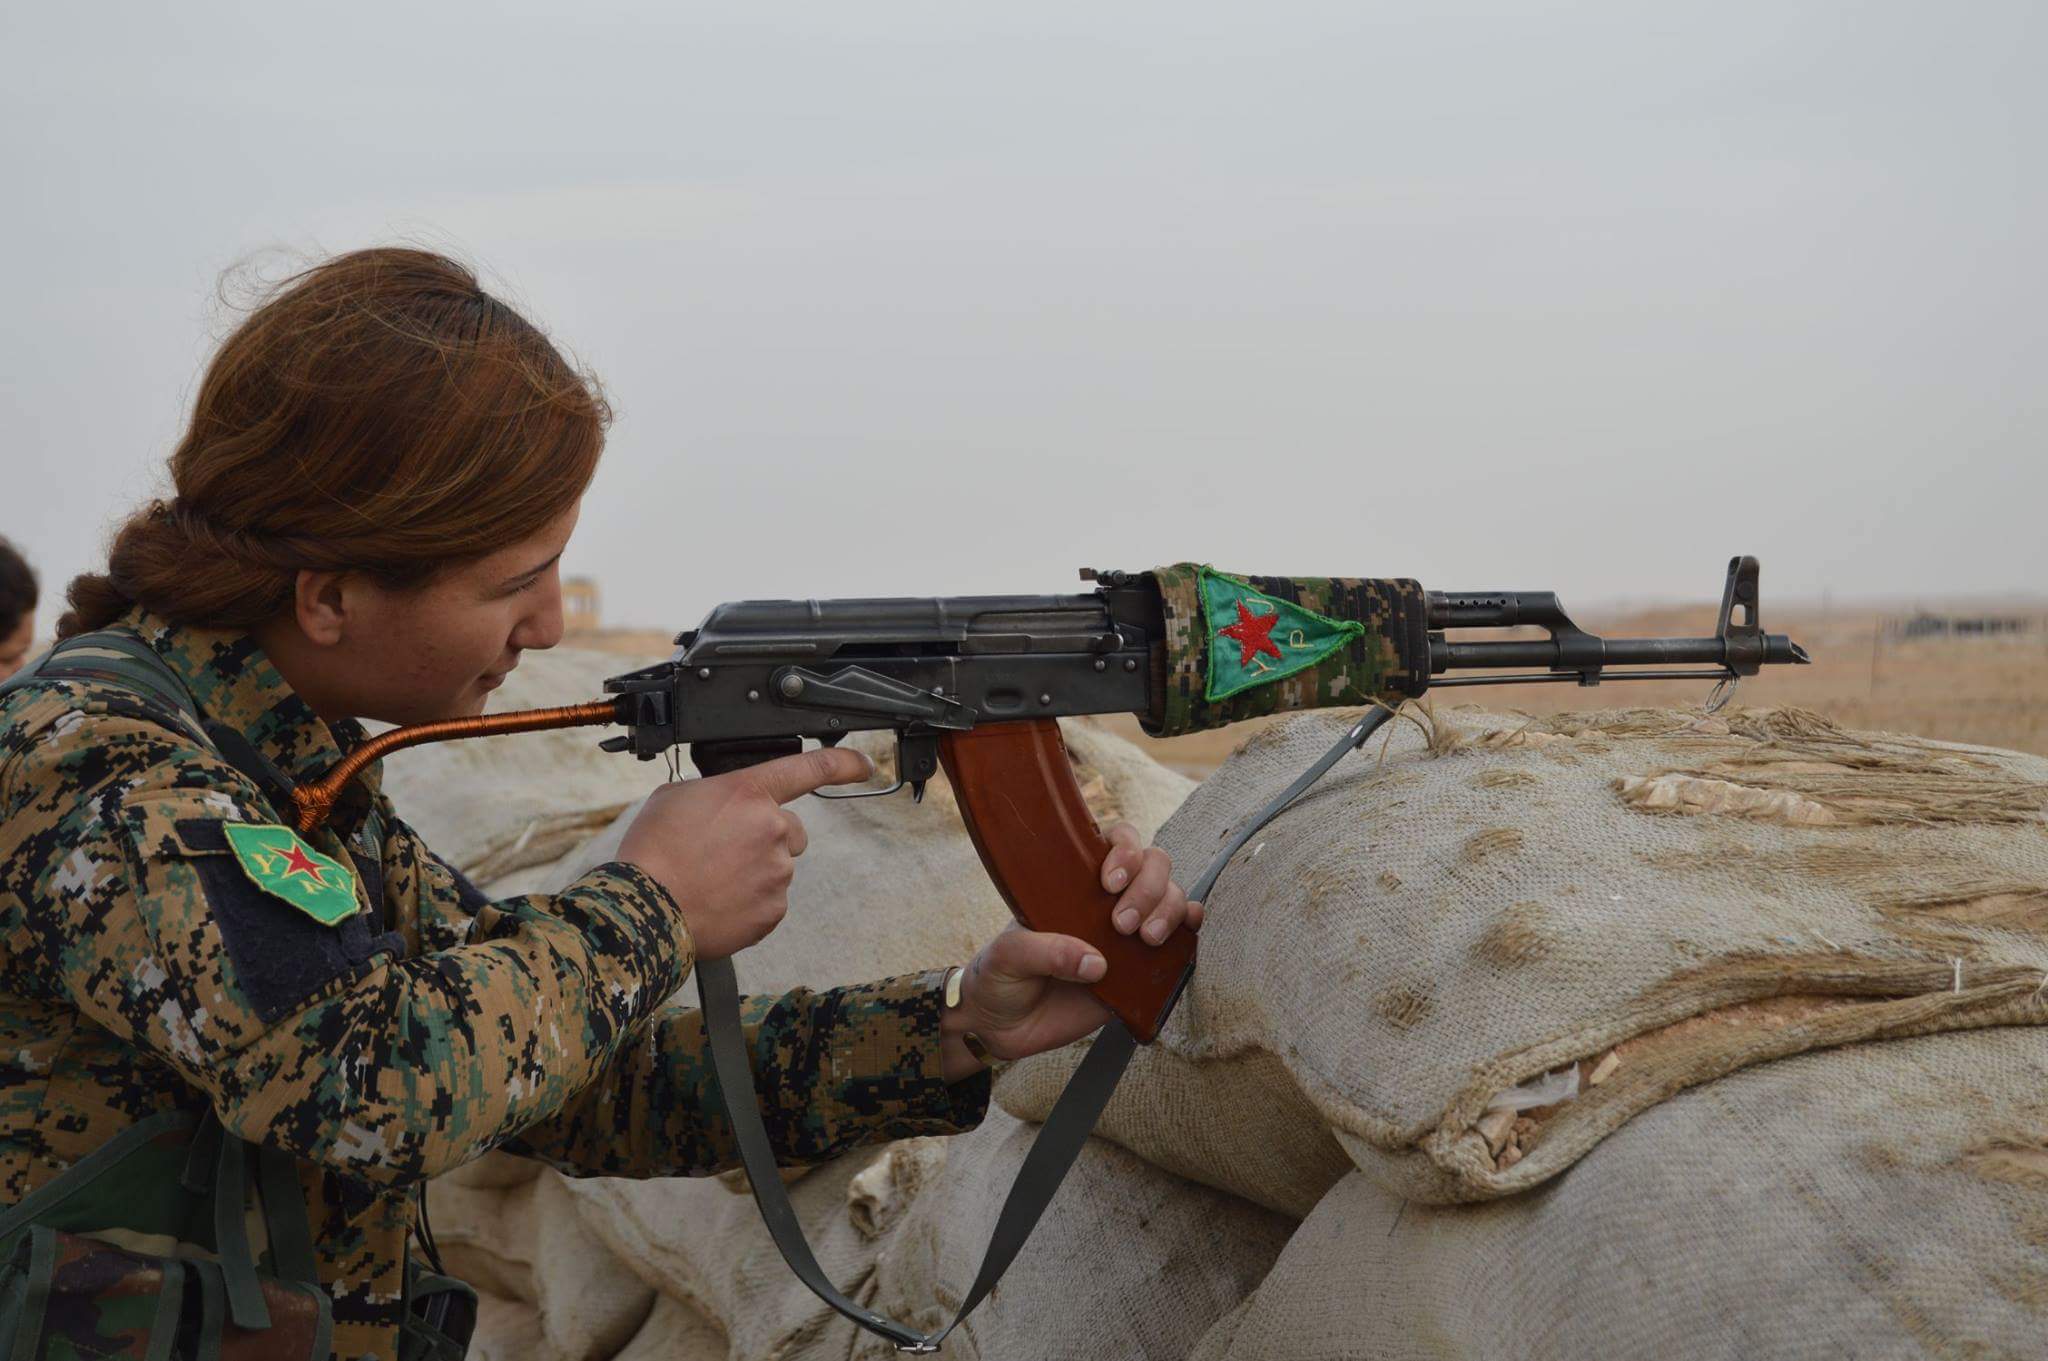 What You Should Know About Kurdish Fighters